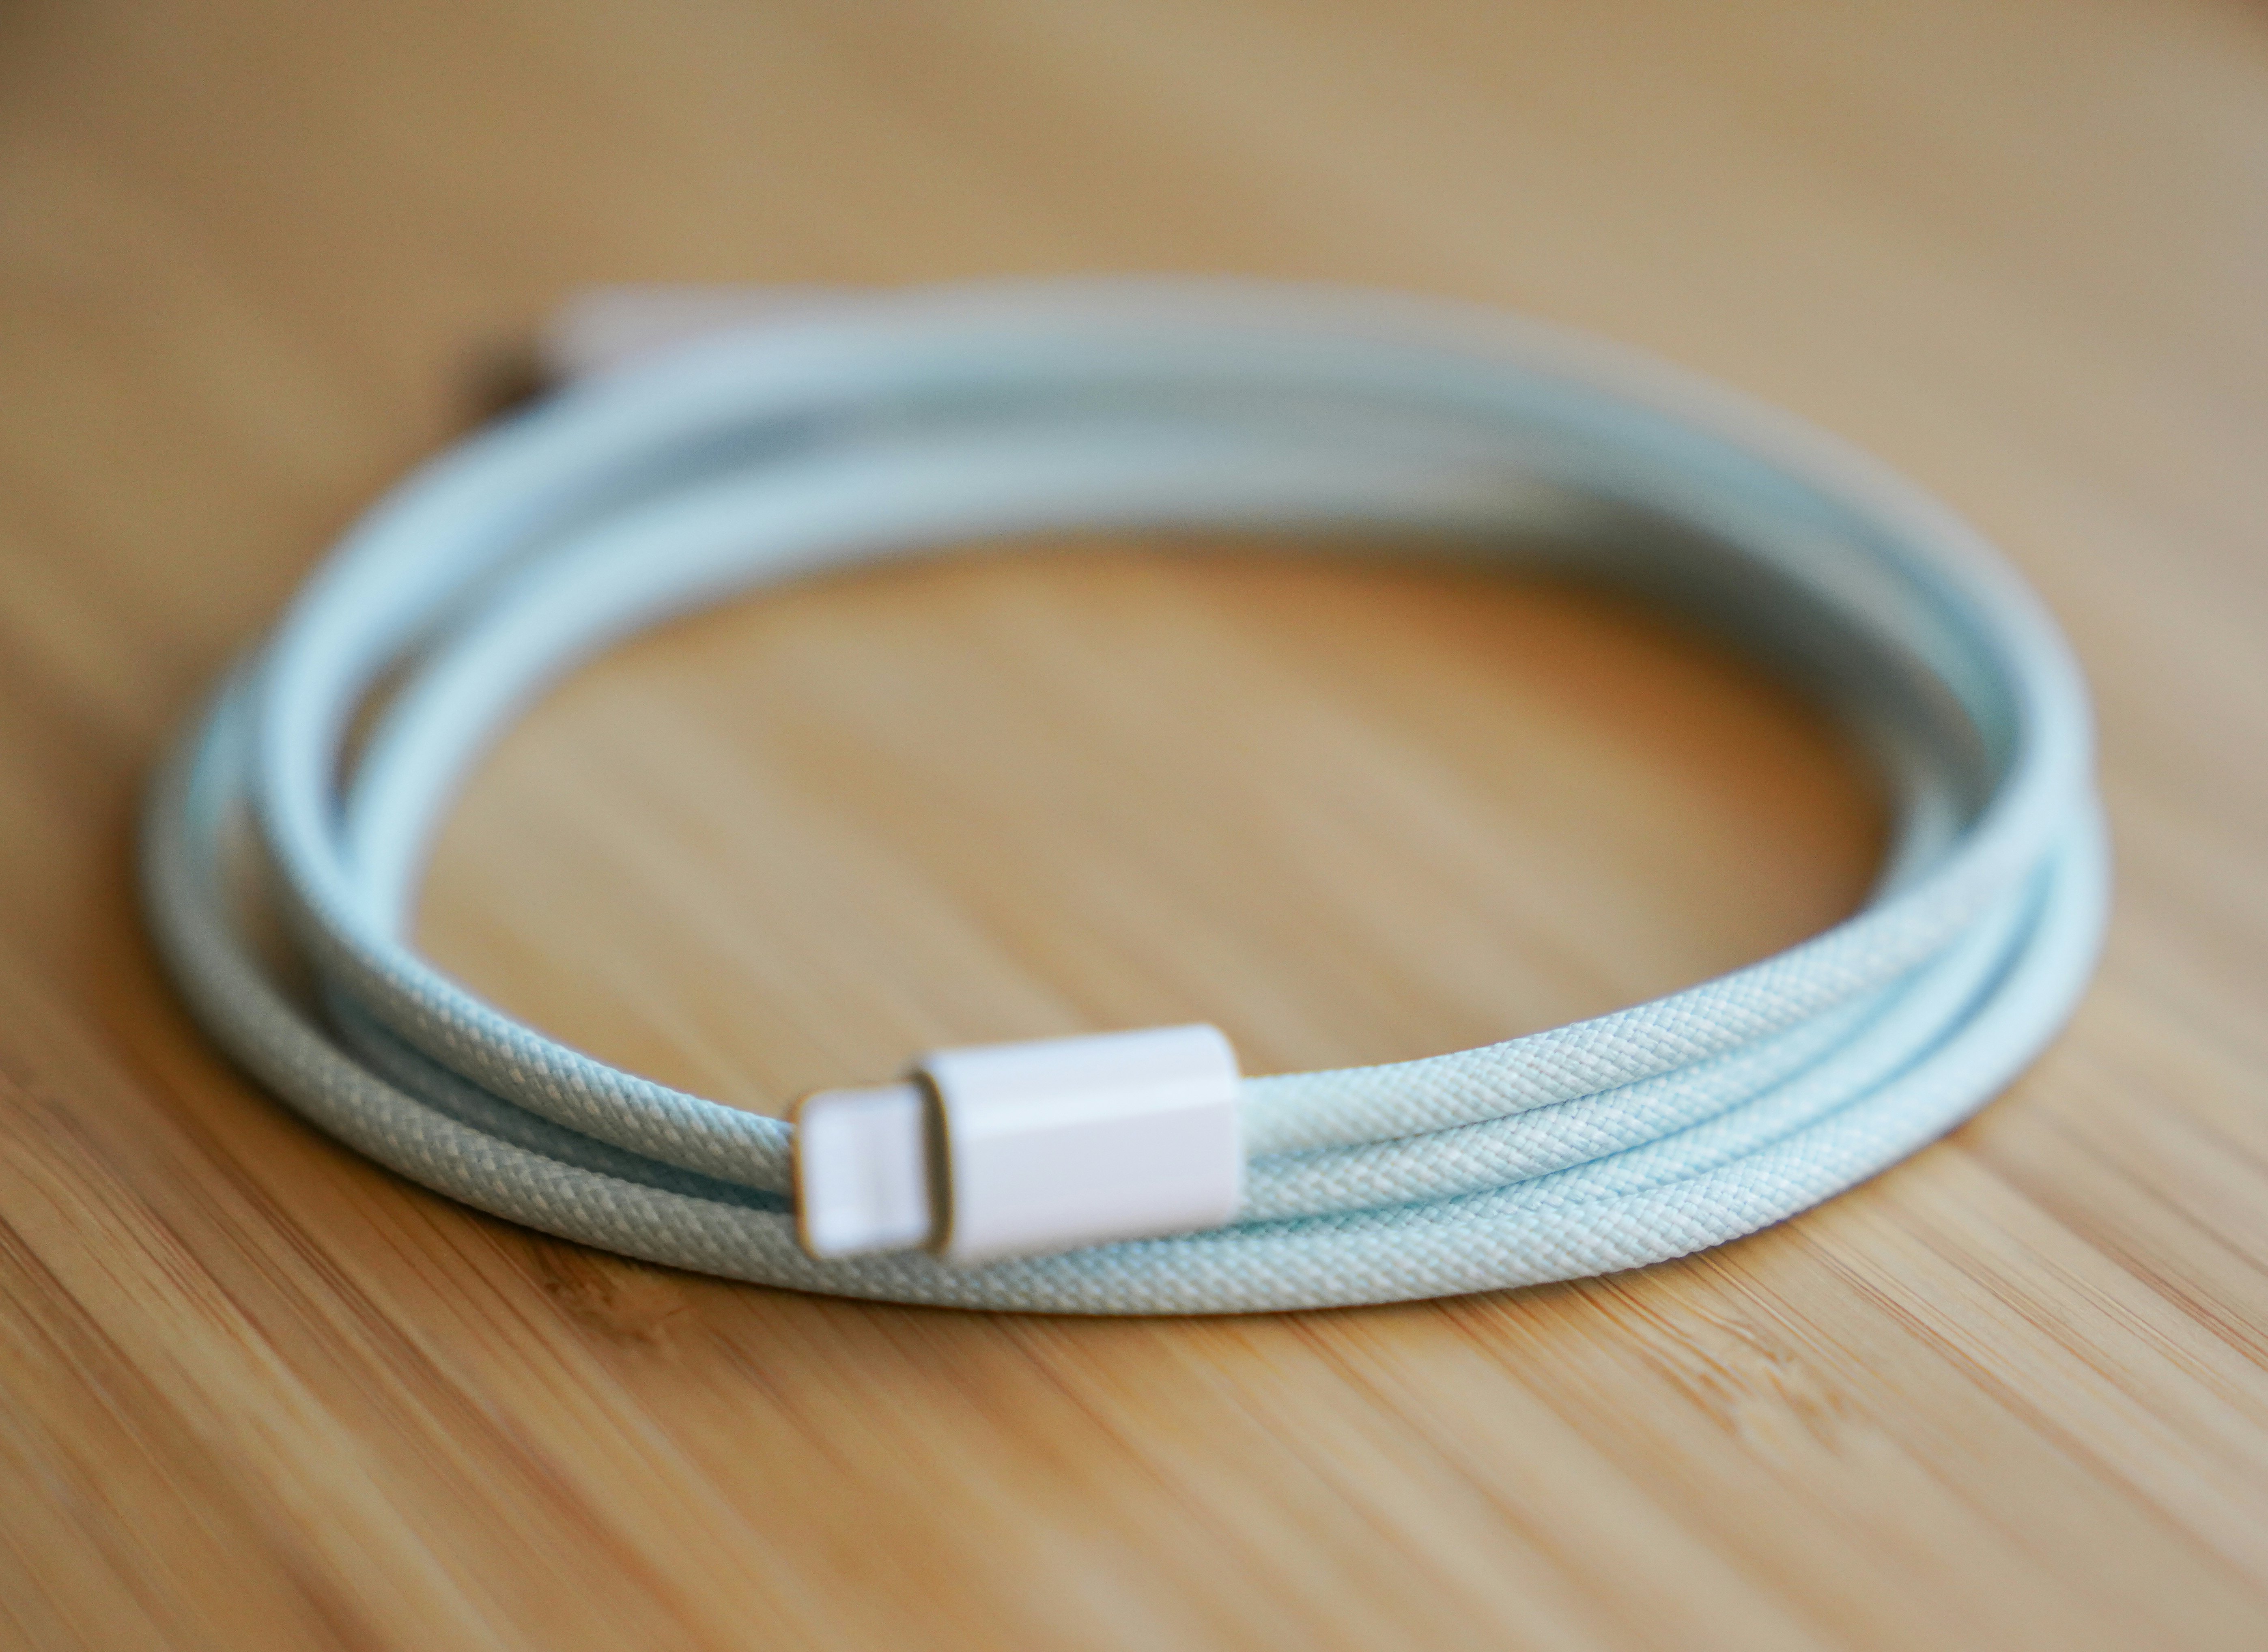 How to get Apple's awesome, braided Lightning cable since it's not